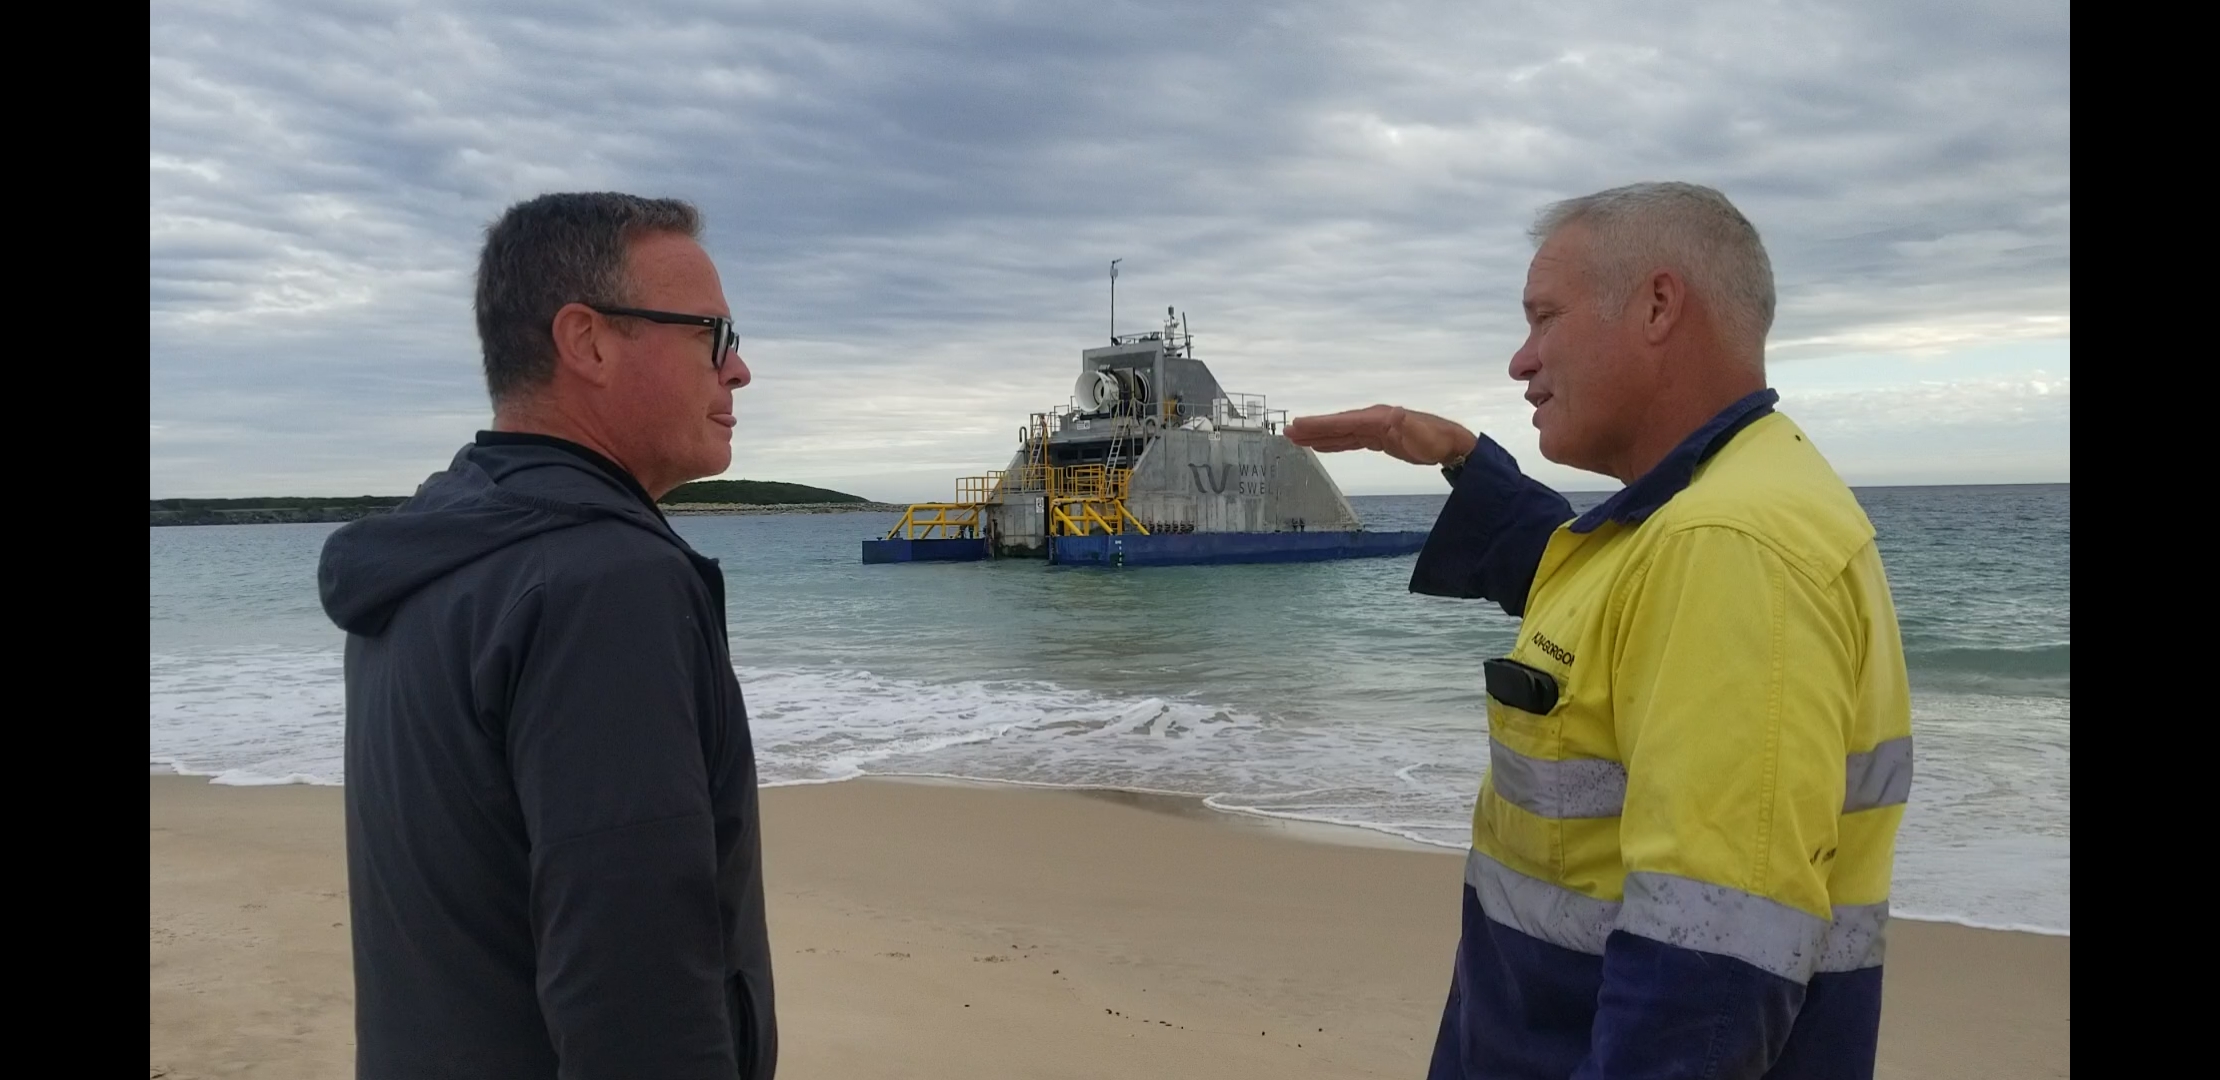 Taking The “Microgrid” Scenic Route – Byrd’s Australian Homecoming